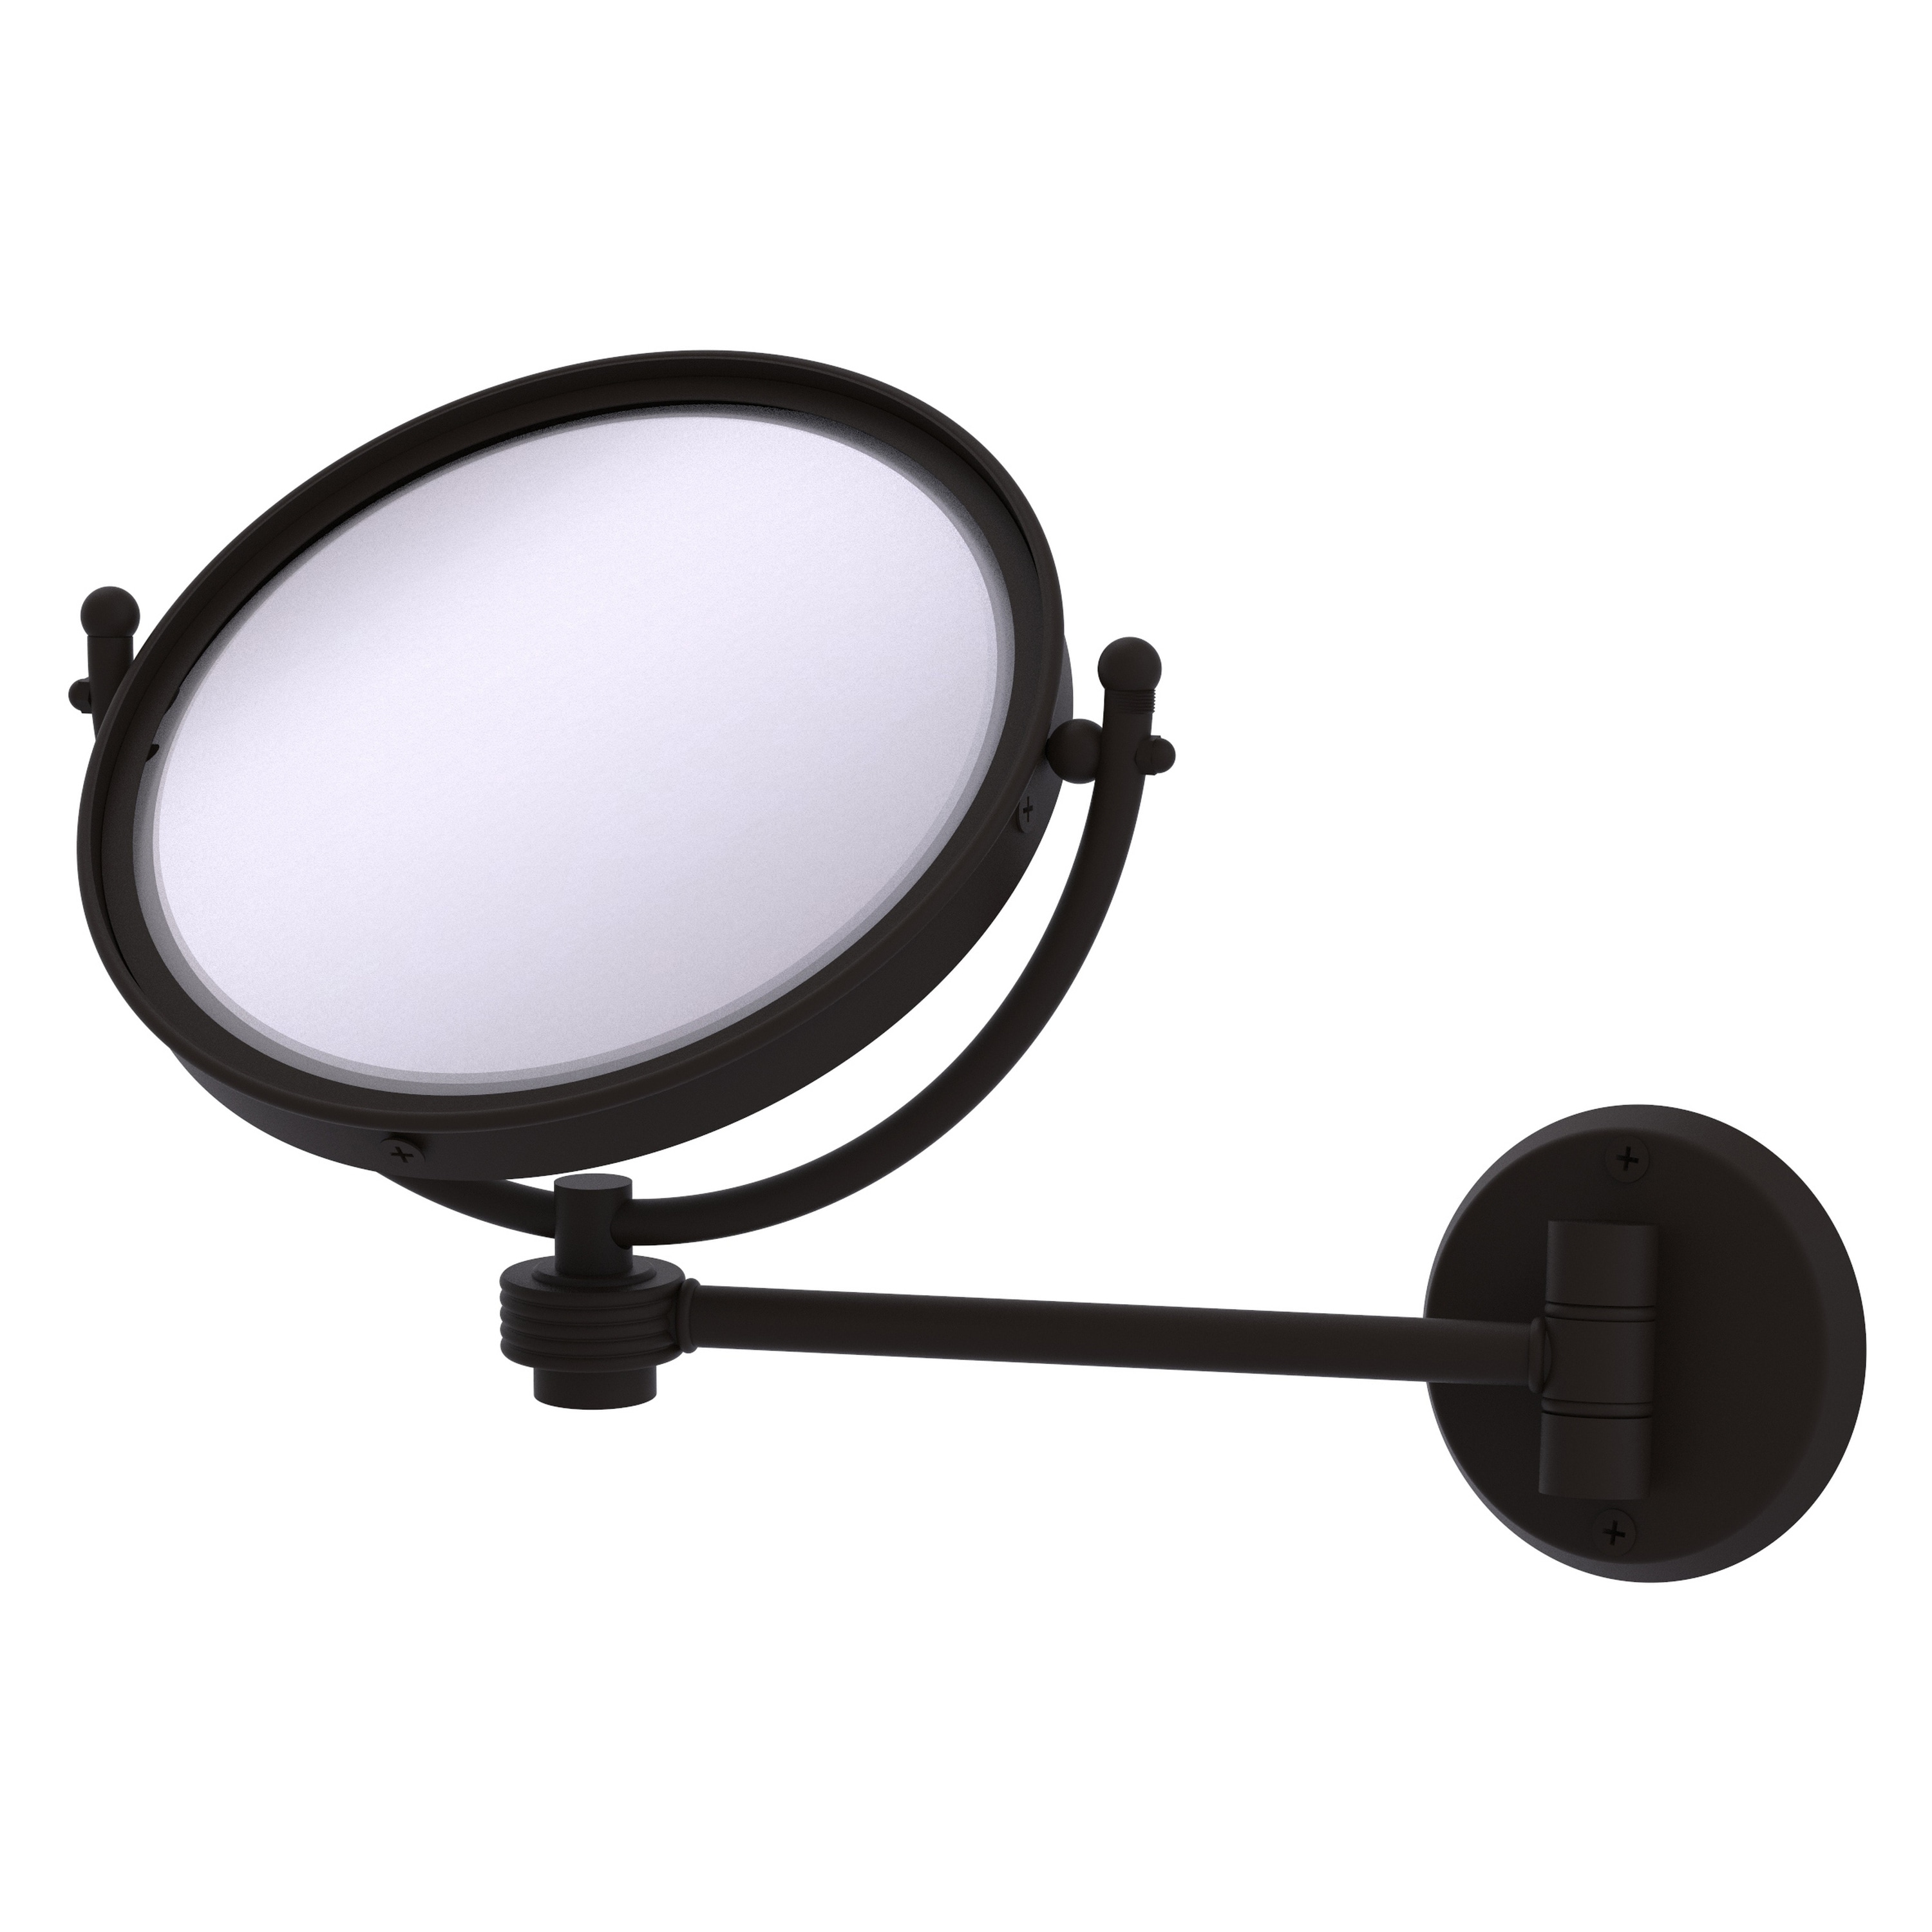 8-in x 10-in Oil-Rubbed Chrome Double-sided 3X Magnifying Wall-mounted Vanity Mirror | - Allied Brass WM-5G/3X-ORB